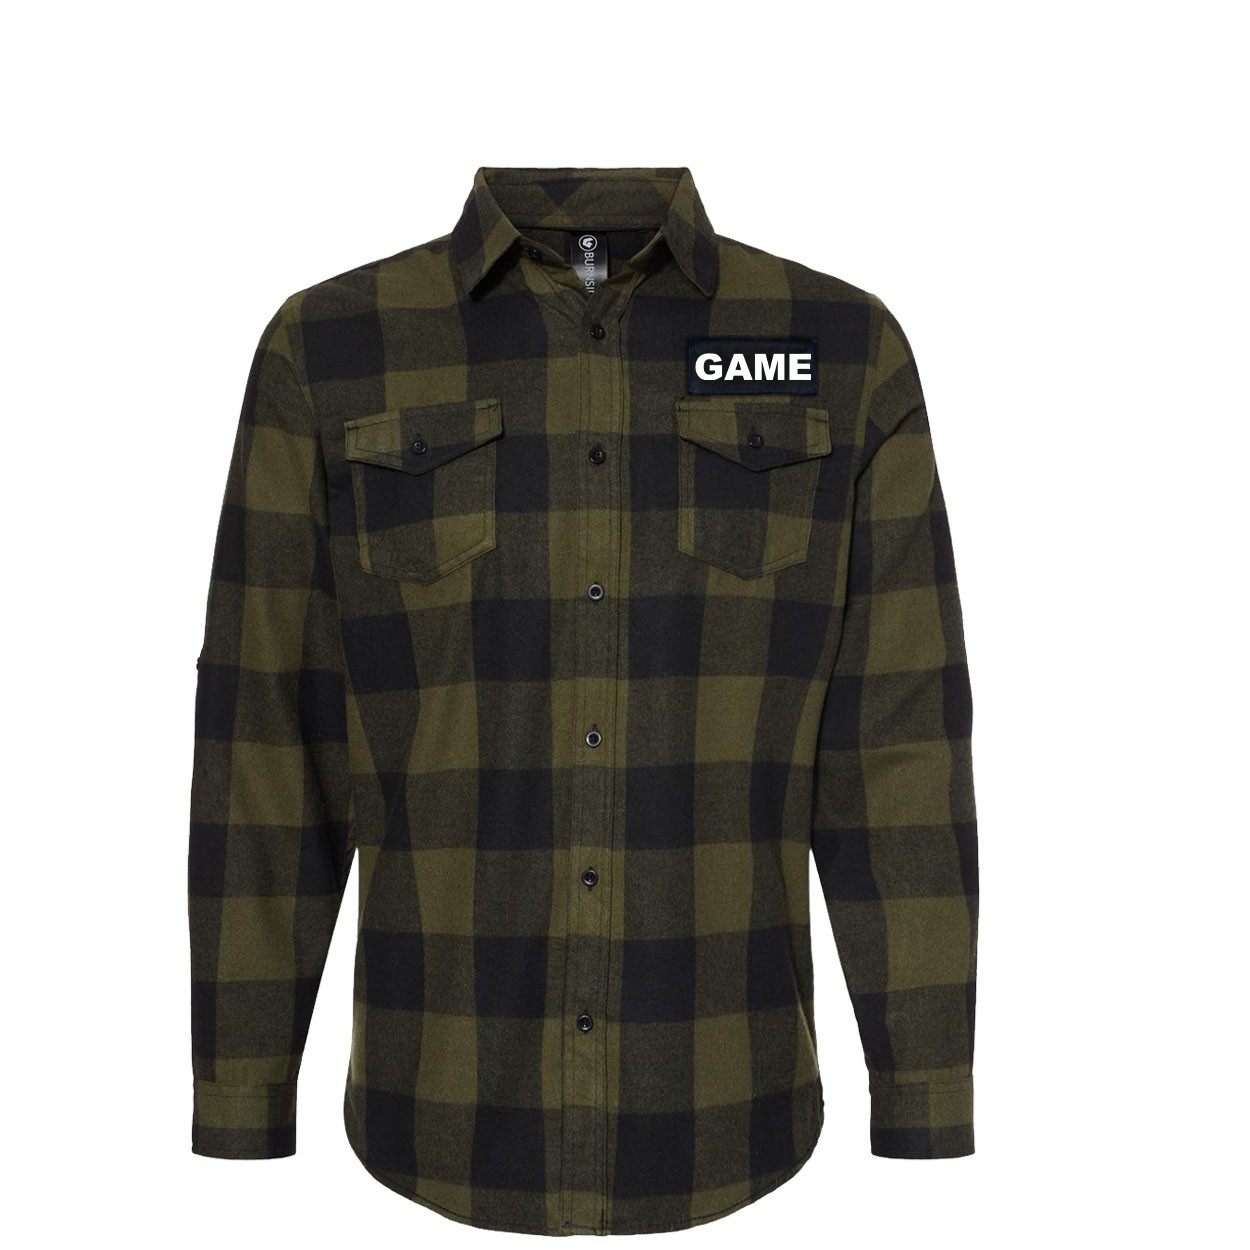 Game Brand Logo Classic Unisex Long Sleeve Woven Patch Flannel Shirt Army/Black (White Logo)